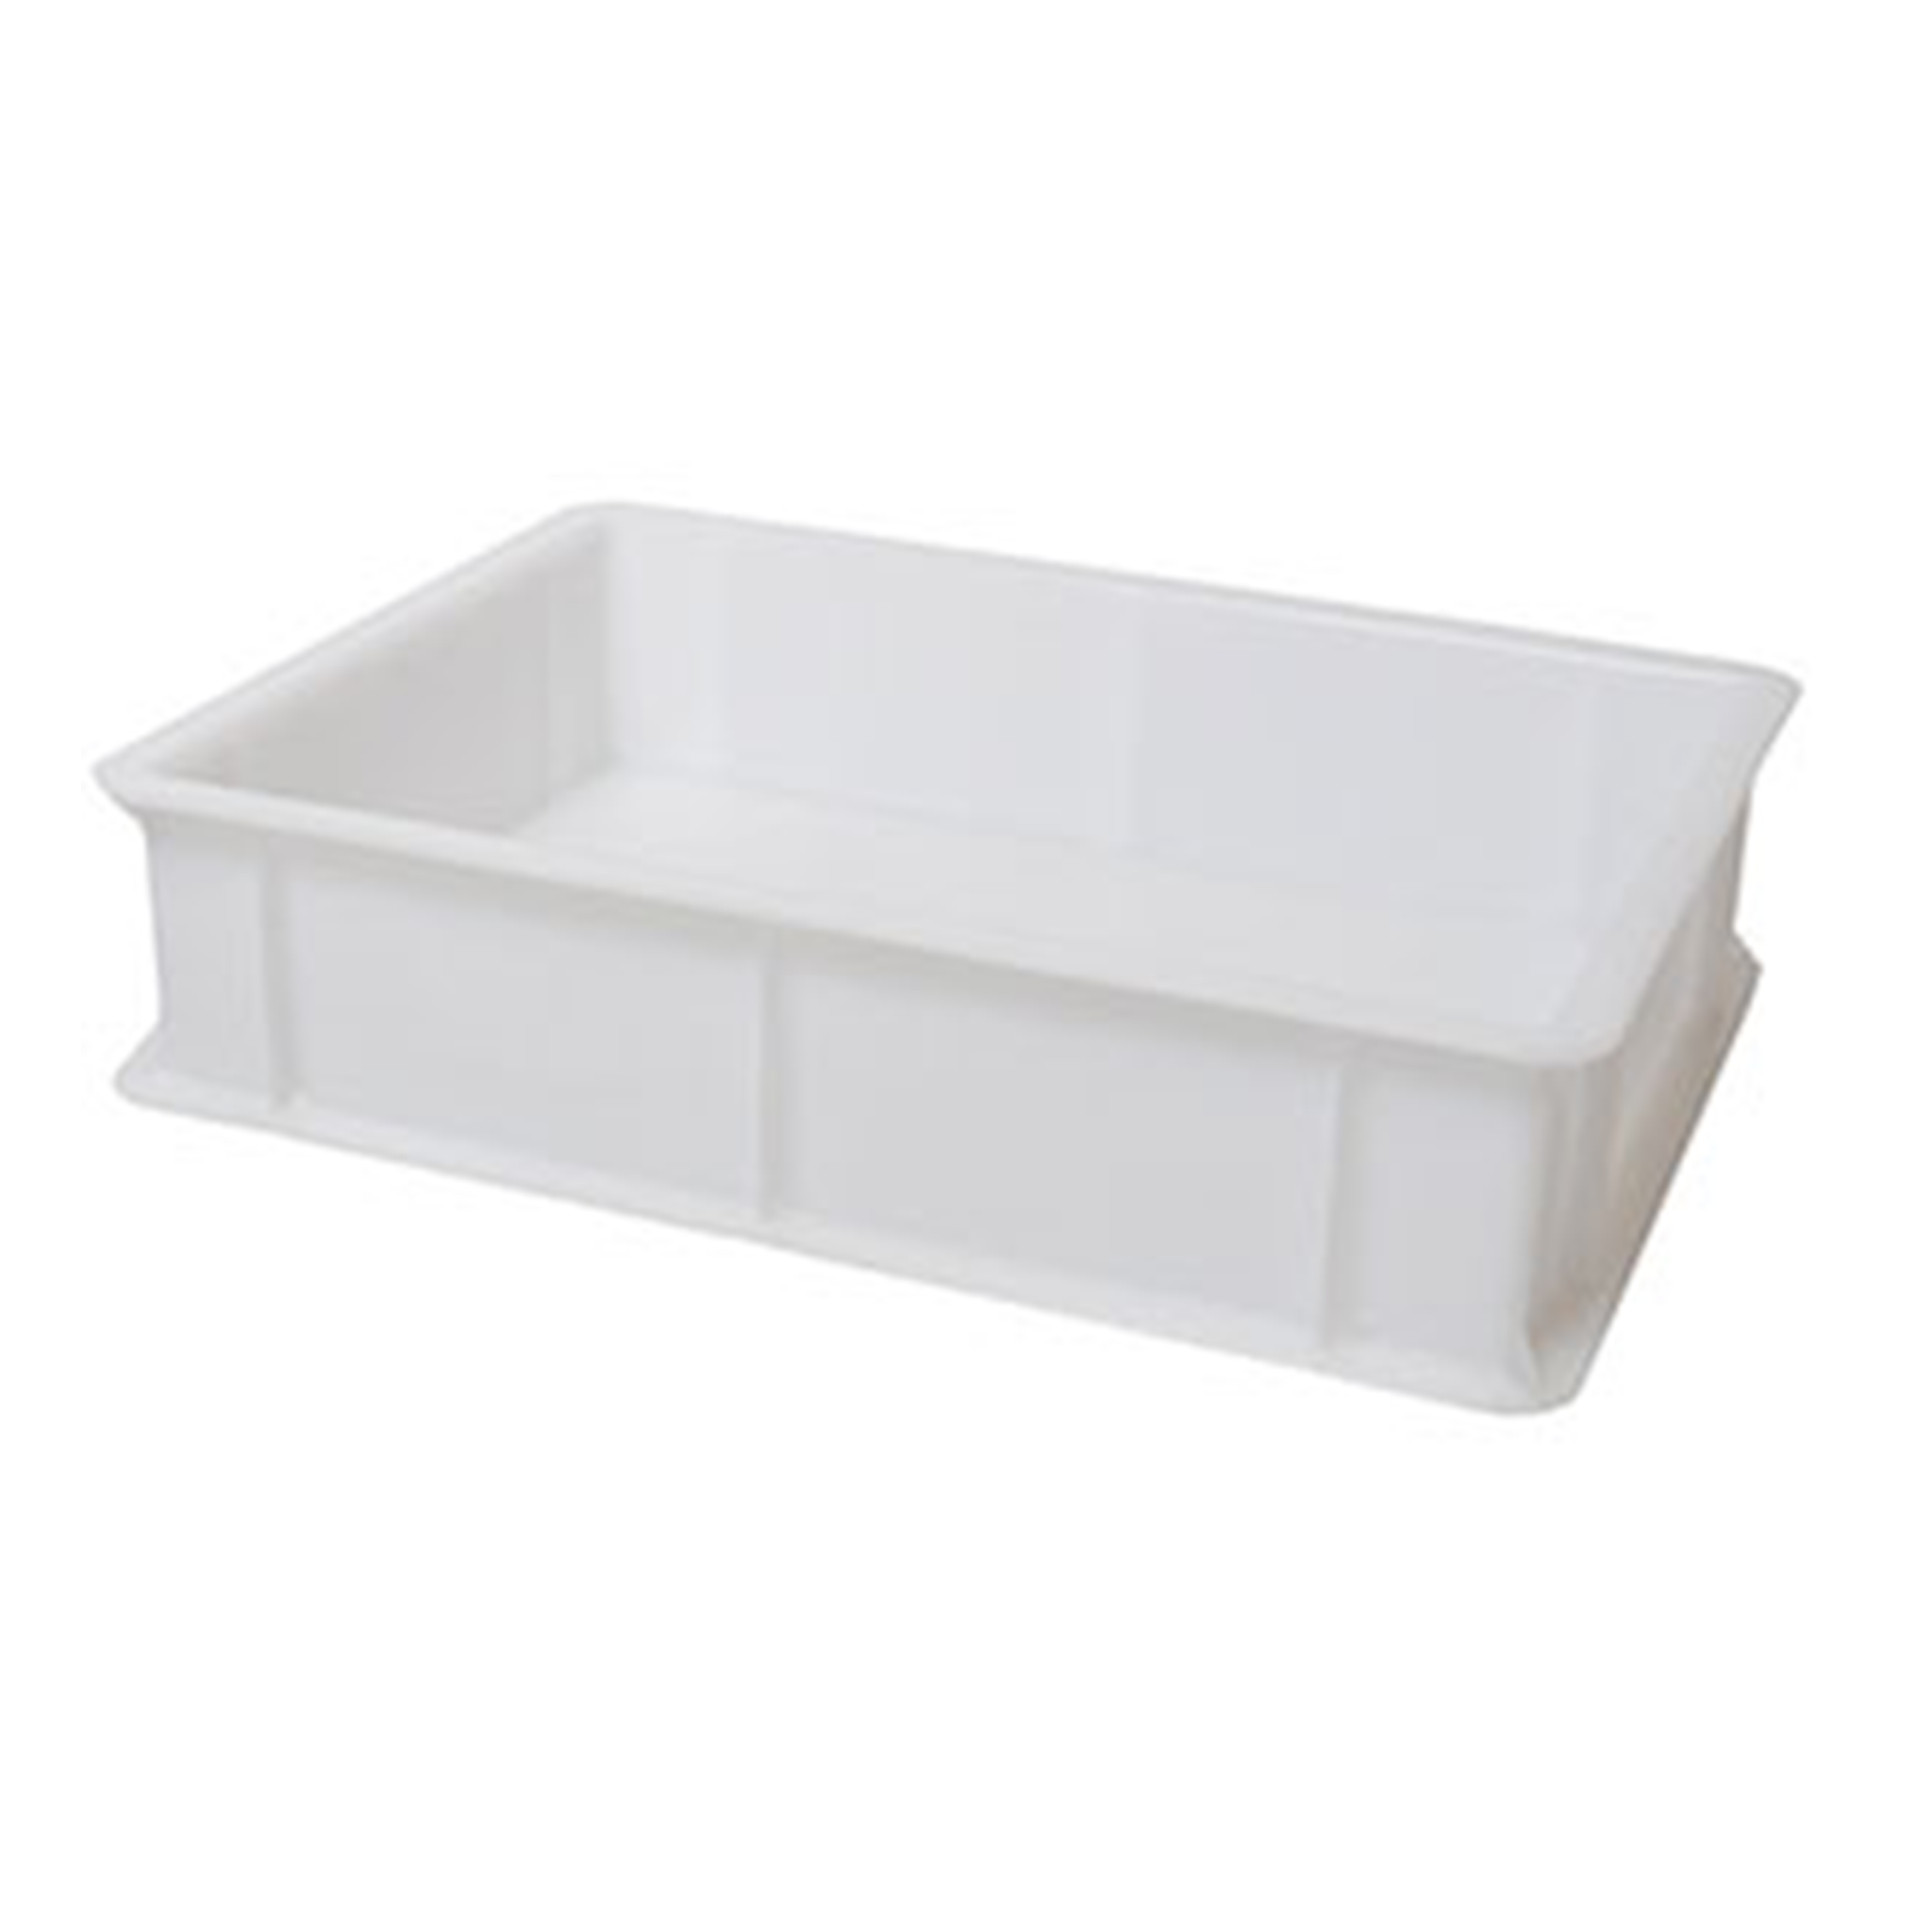 4 x Pizza dough tray with lid 400mm x 300mm white stackable dough storage box  